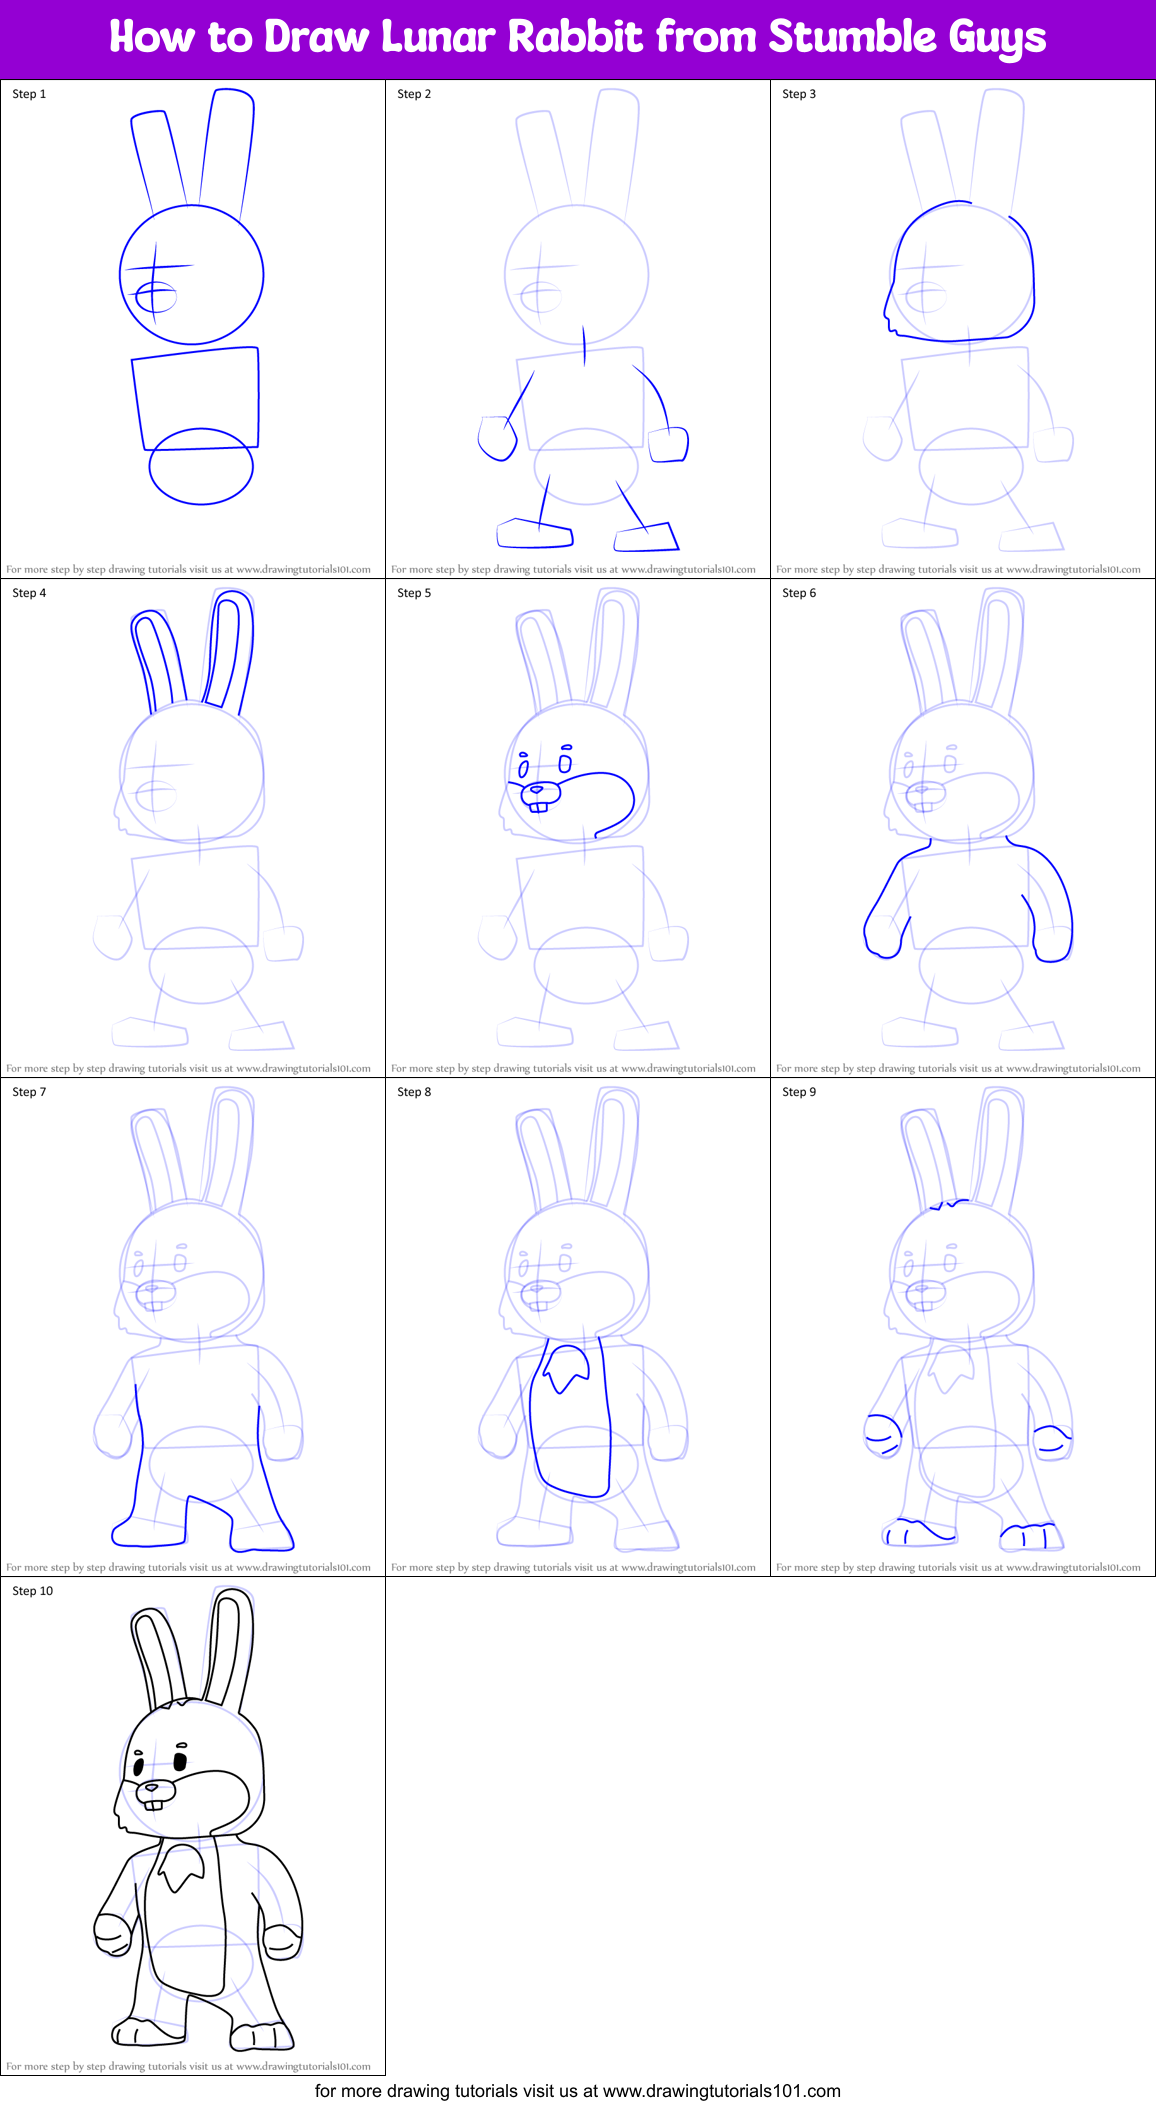 How to Draw Lunar Rabbit from Stumble Guys (Stumble Guys) Step by Step ...